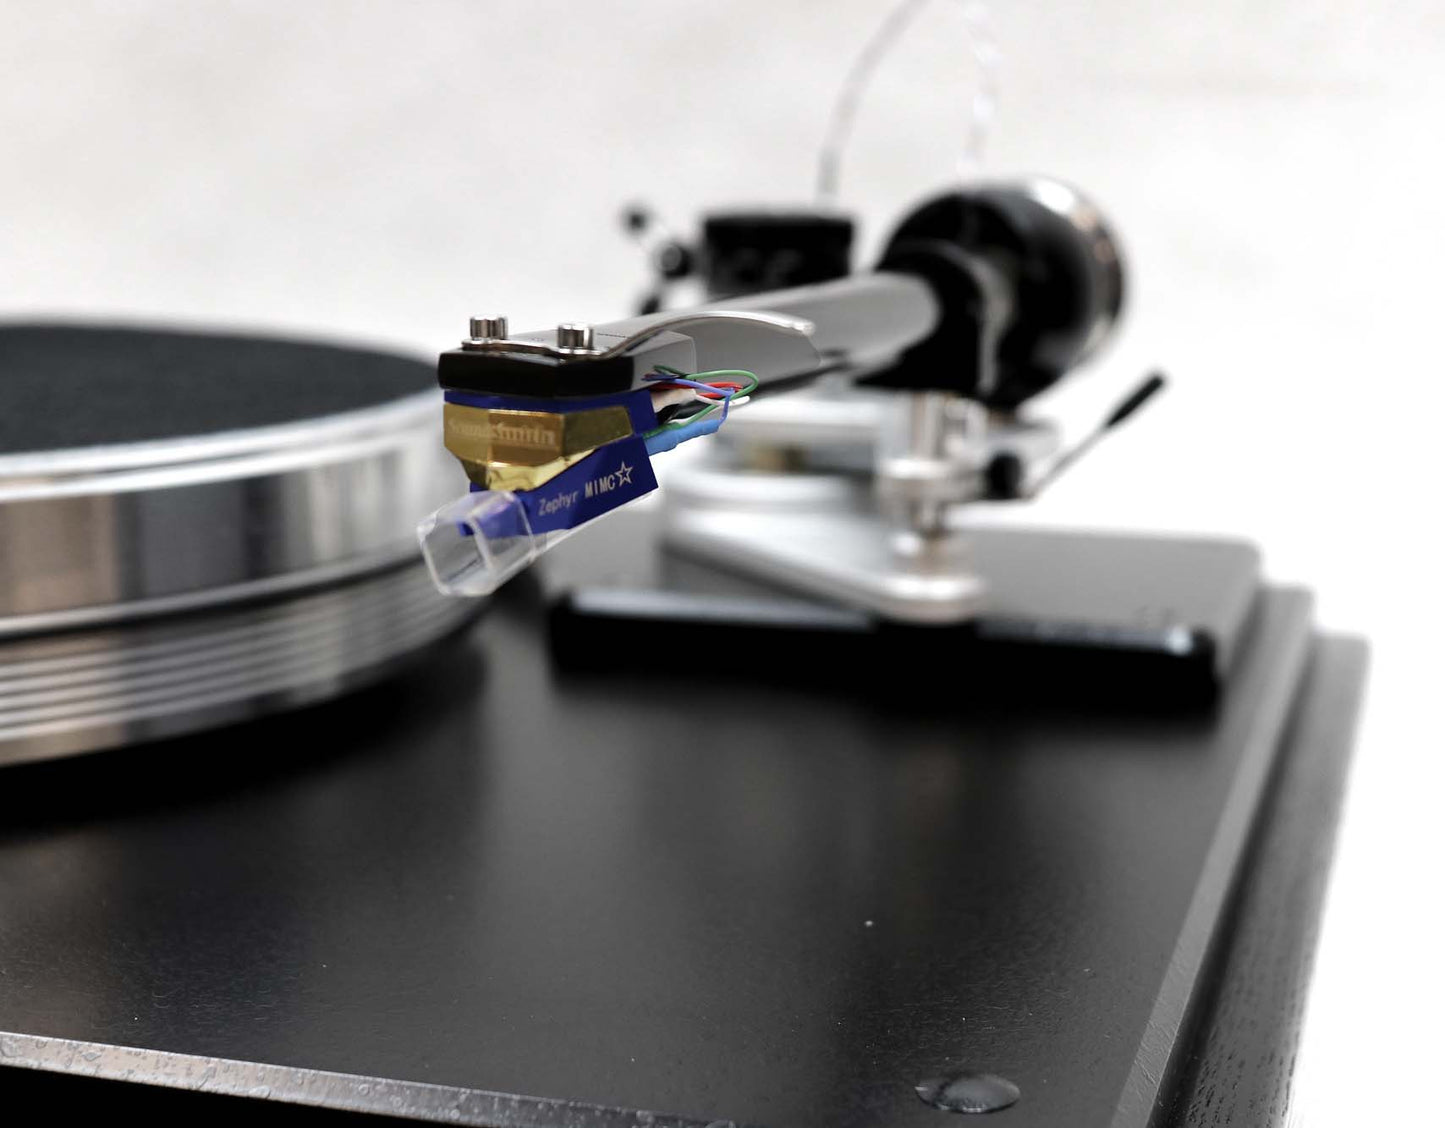 VPI Classic Signature HW Reference with Fatboy 10" Tonearm